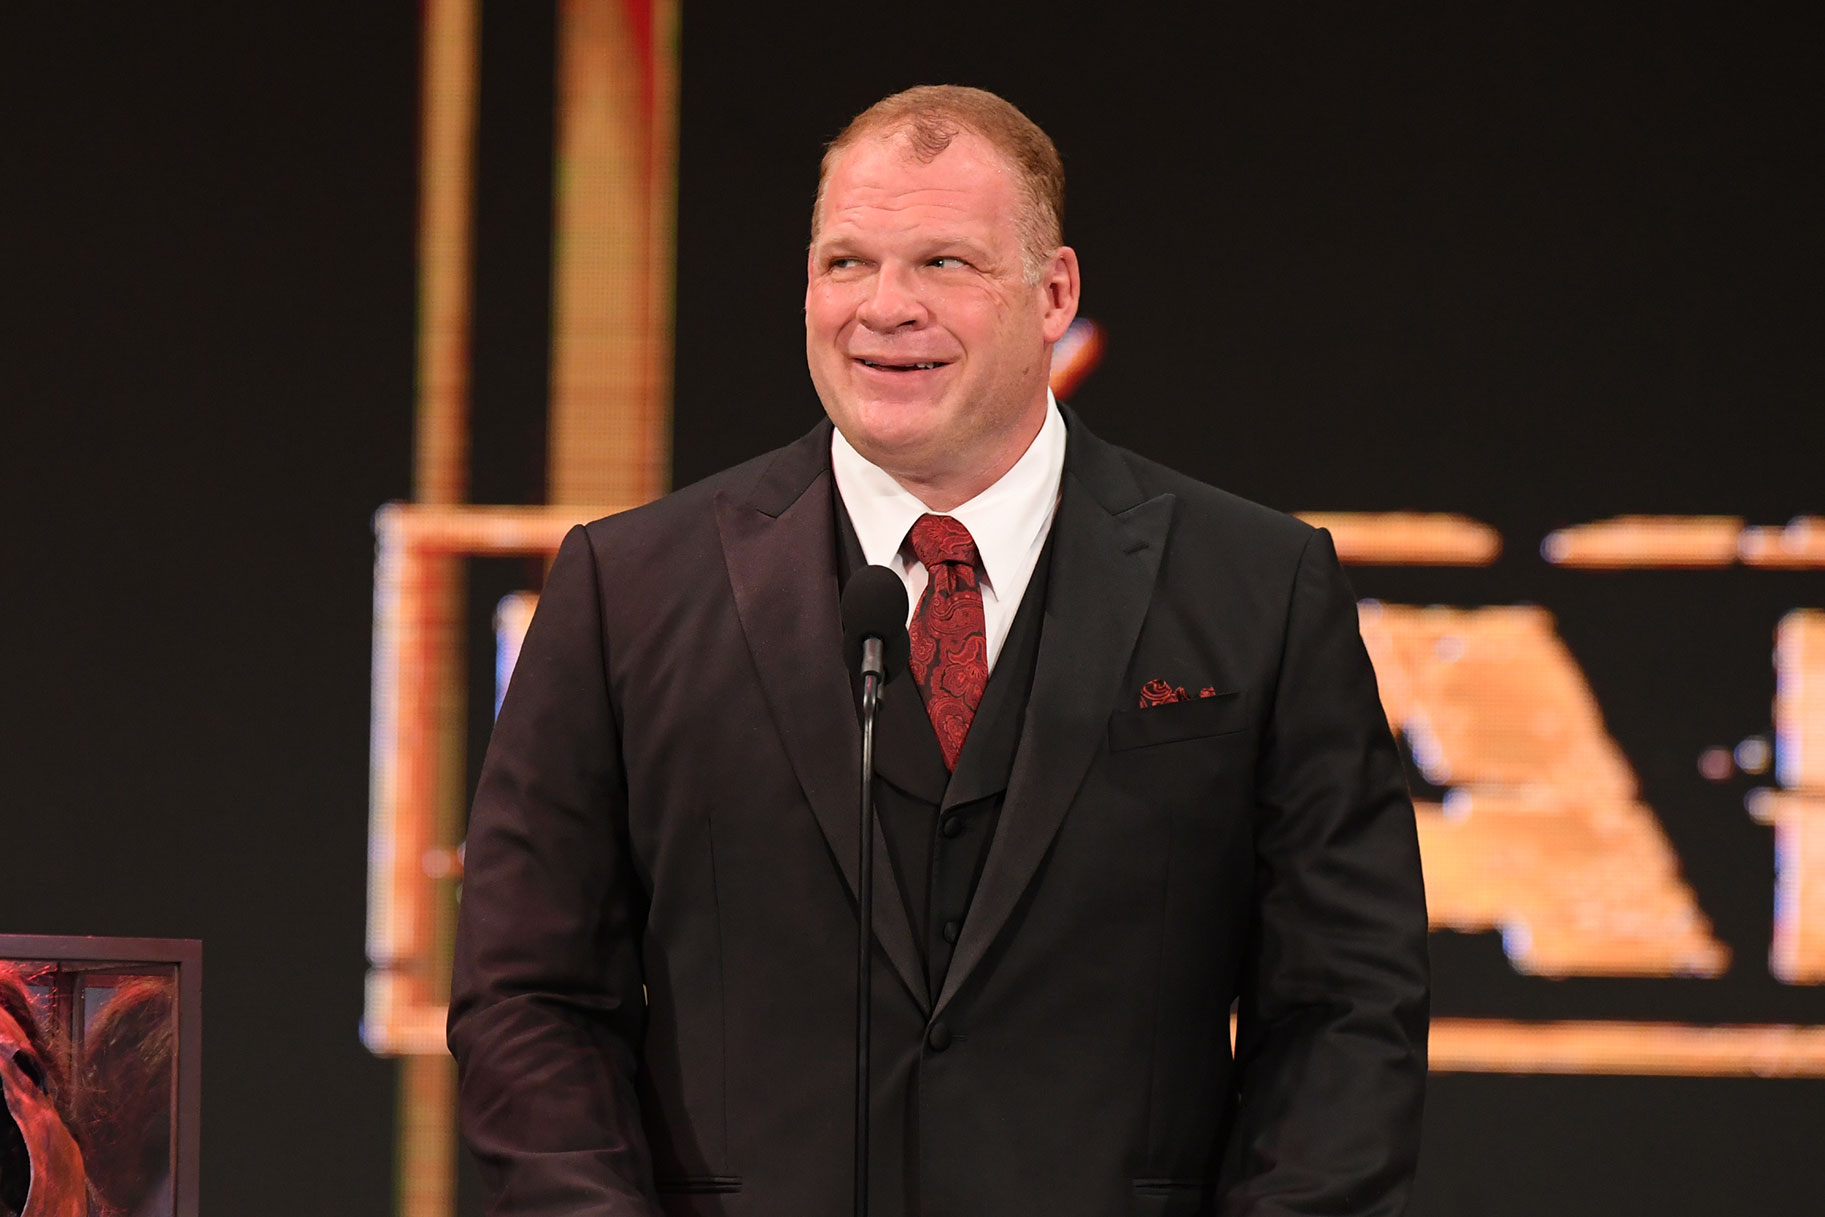 Kane wearing a suit and smiling on stage